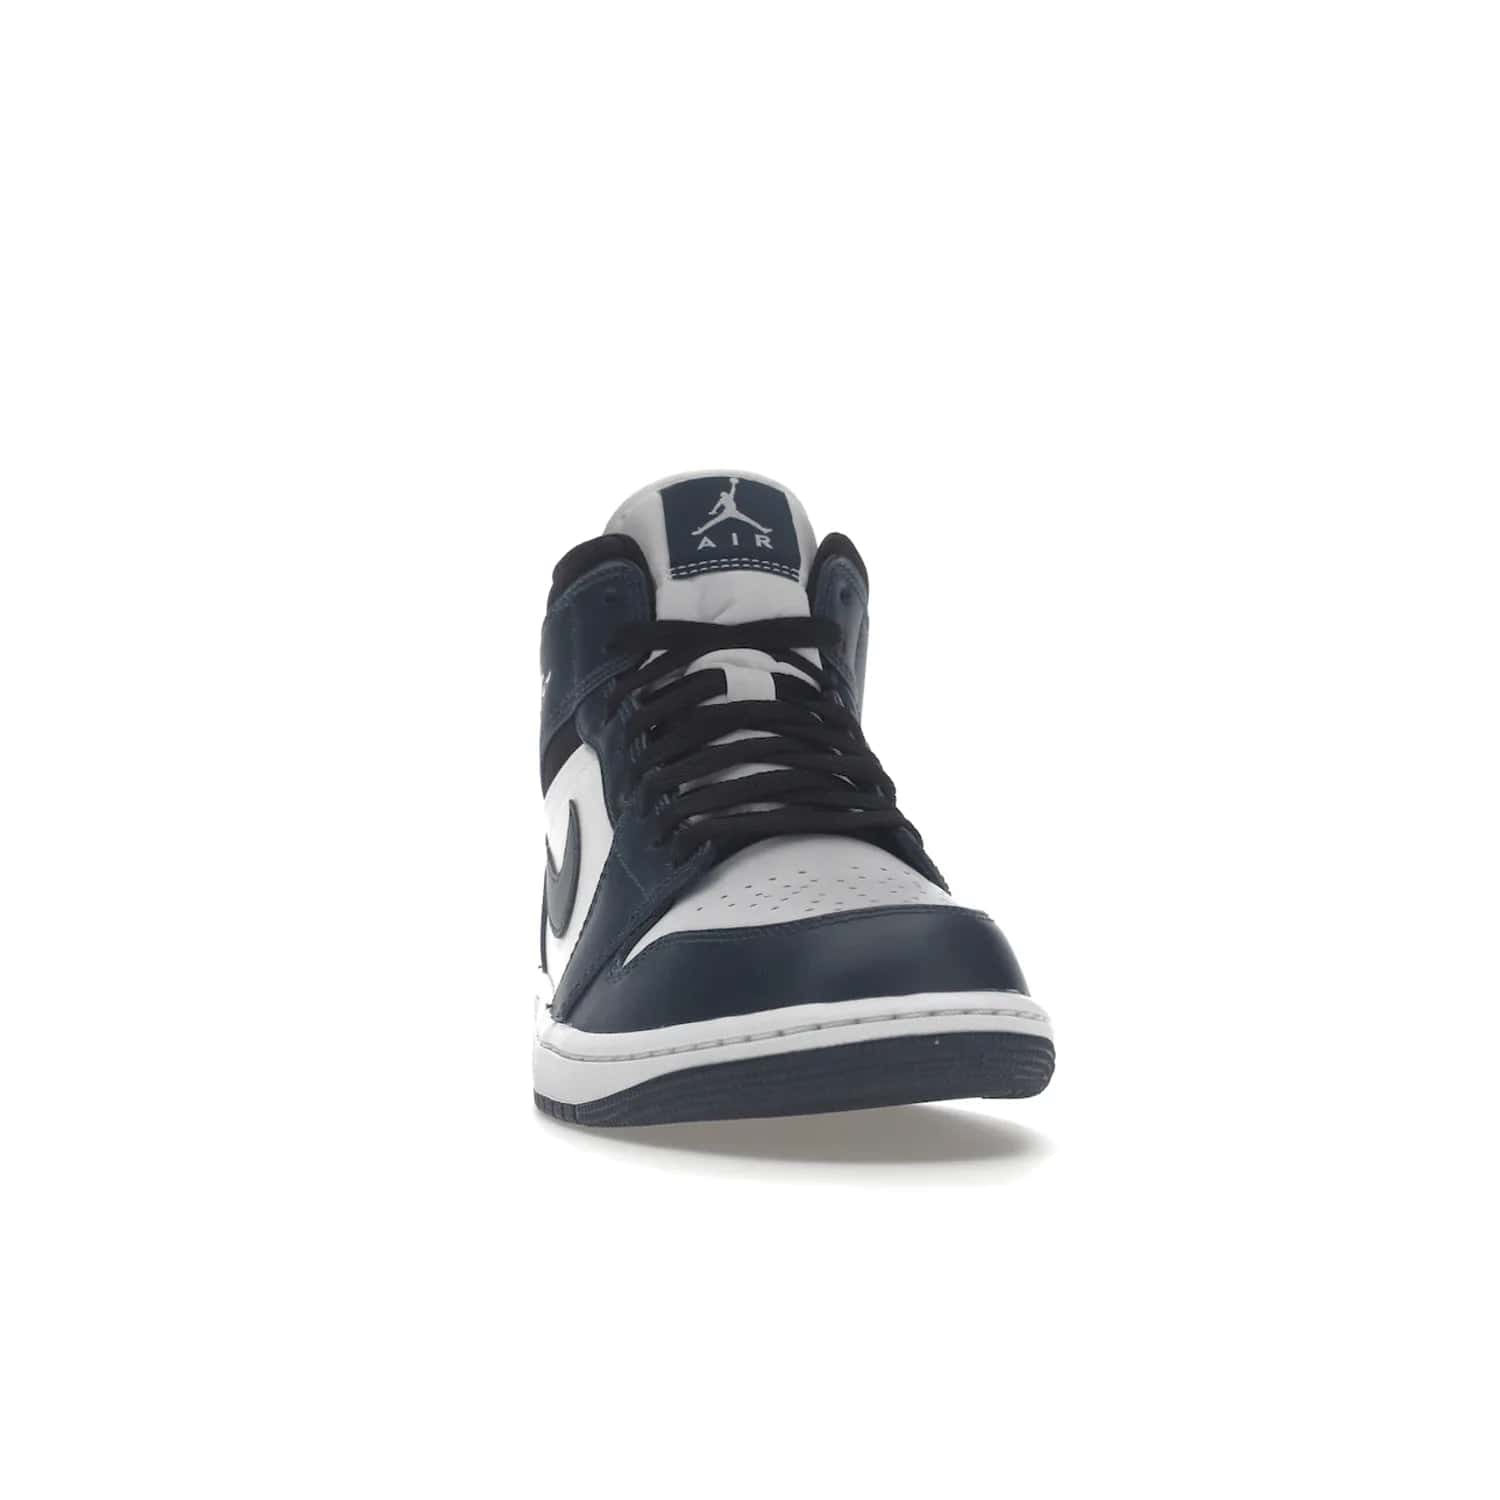 Jordan 1 Mid Armory Navy - Image 9 - Only at www.BallersClubKickz.com - The Jordan 1 Mid Armory Navy: classic basketball sneaker with soft white leather upper, deep navy blue overlays, and black leather ankle detailing. Iconic style with Jordan Wings logo and Jumpman label.